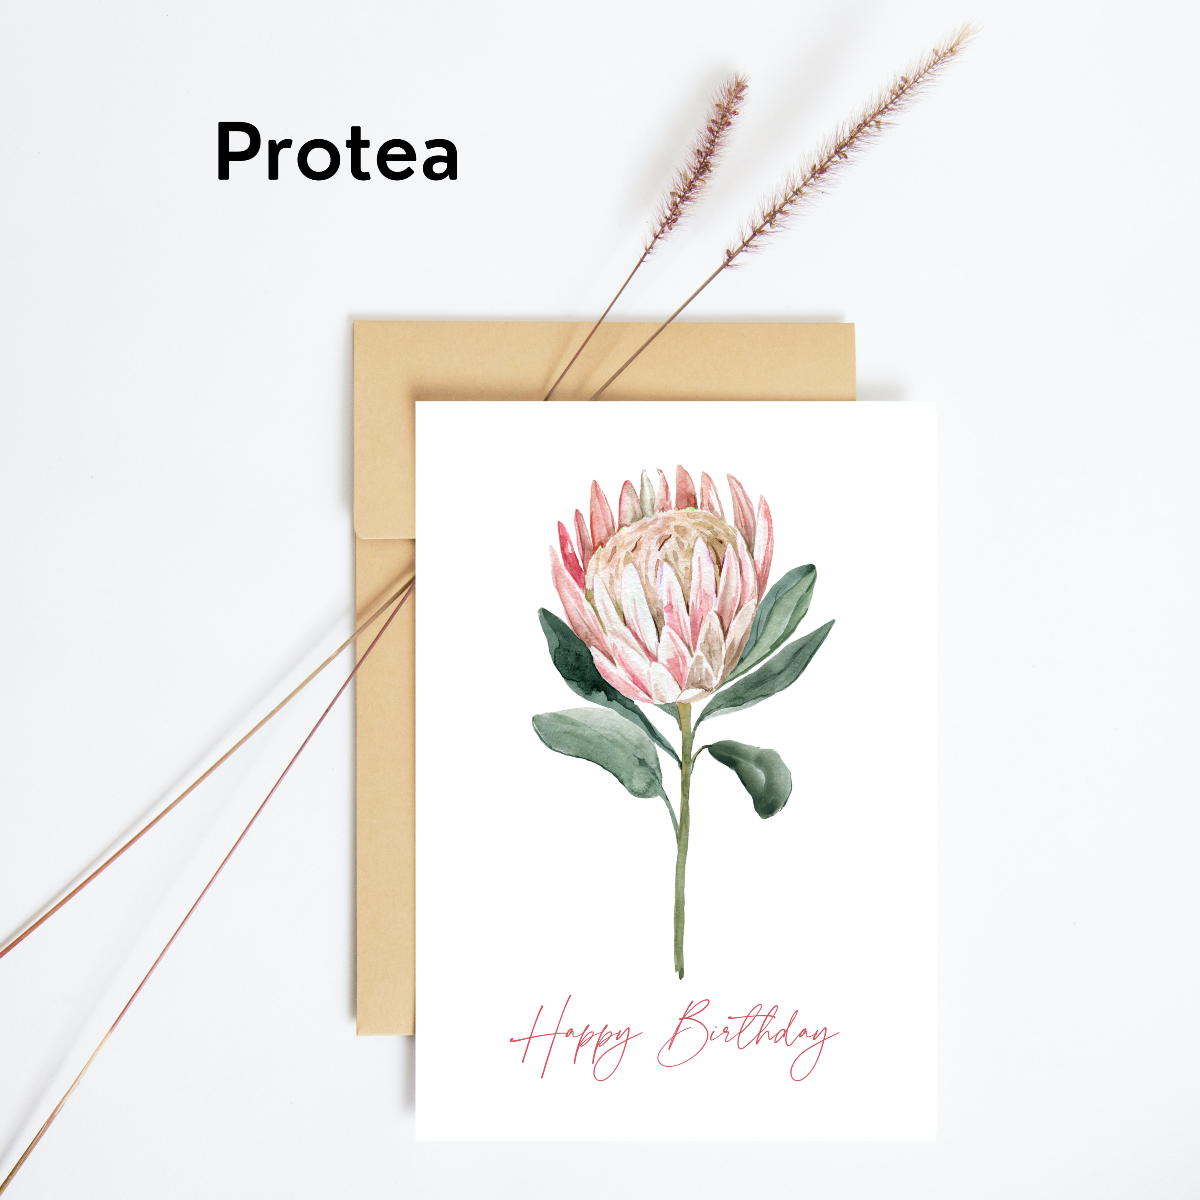 Mockup of birthday card with protea cover